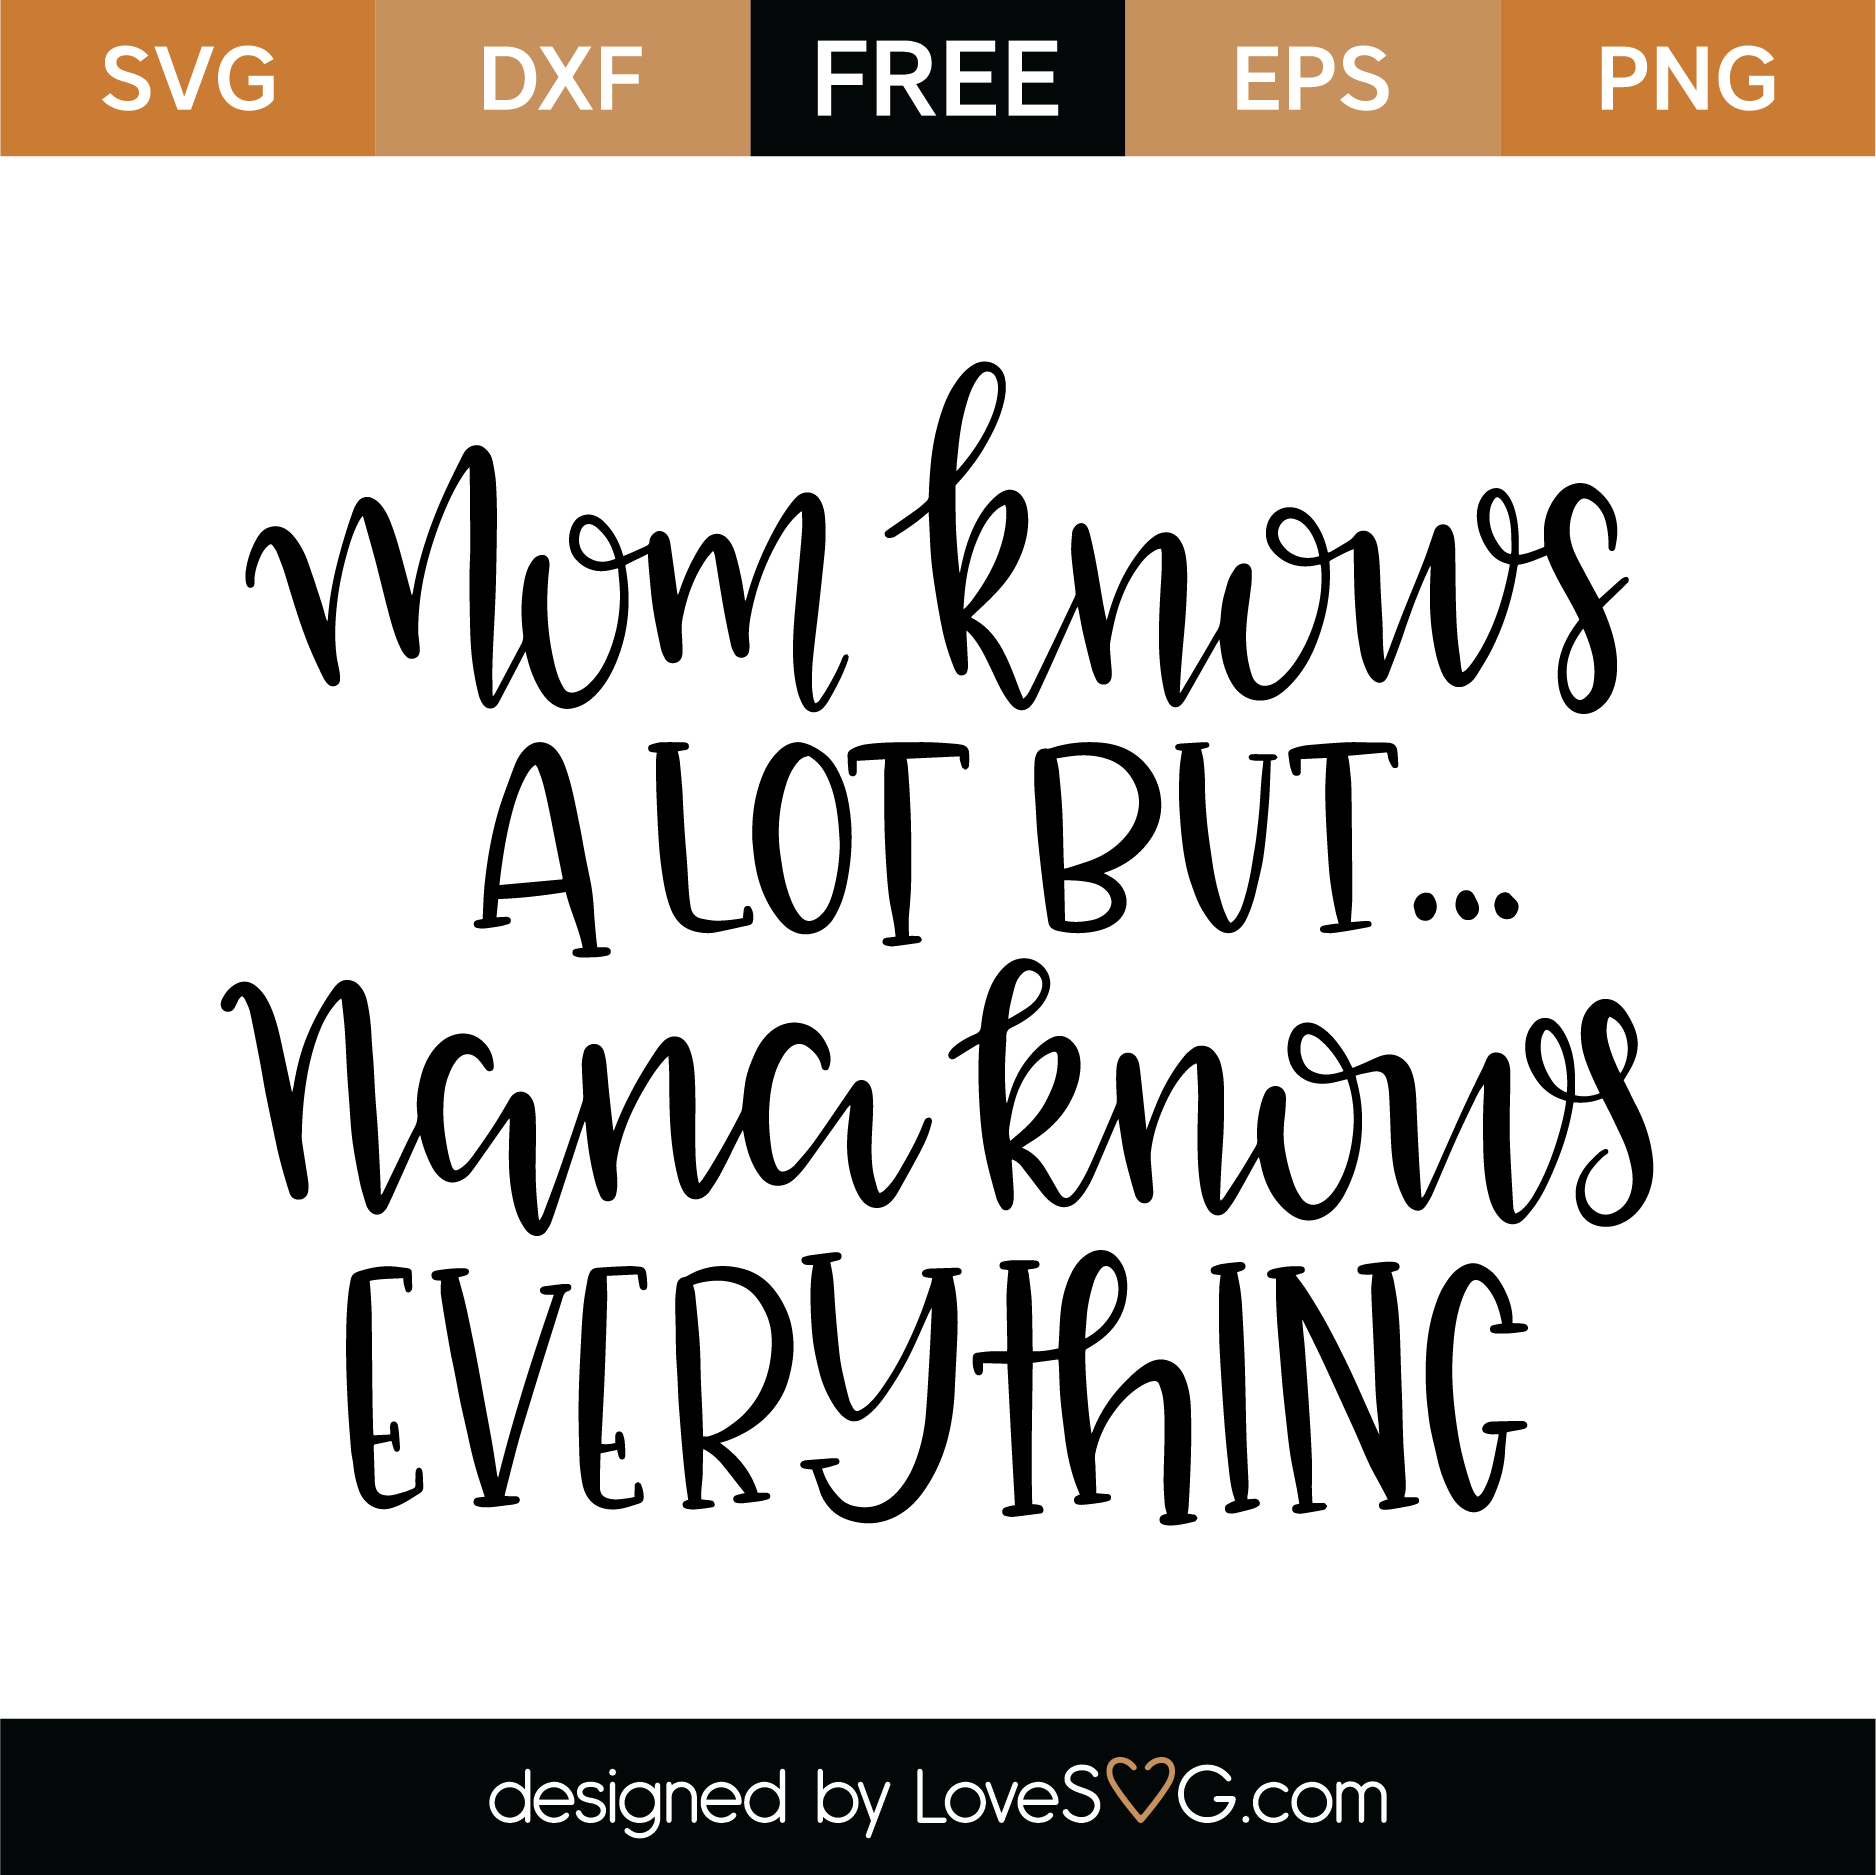 Mom Knows A Lot But Nana Knows Everything SVG Cut File 